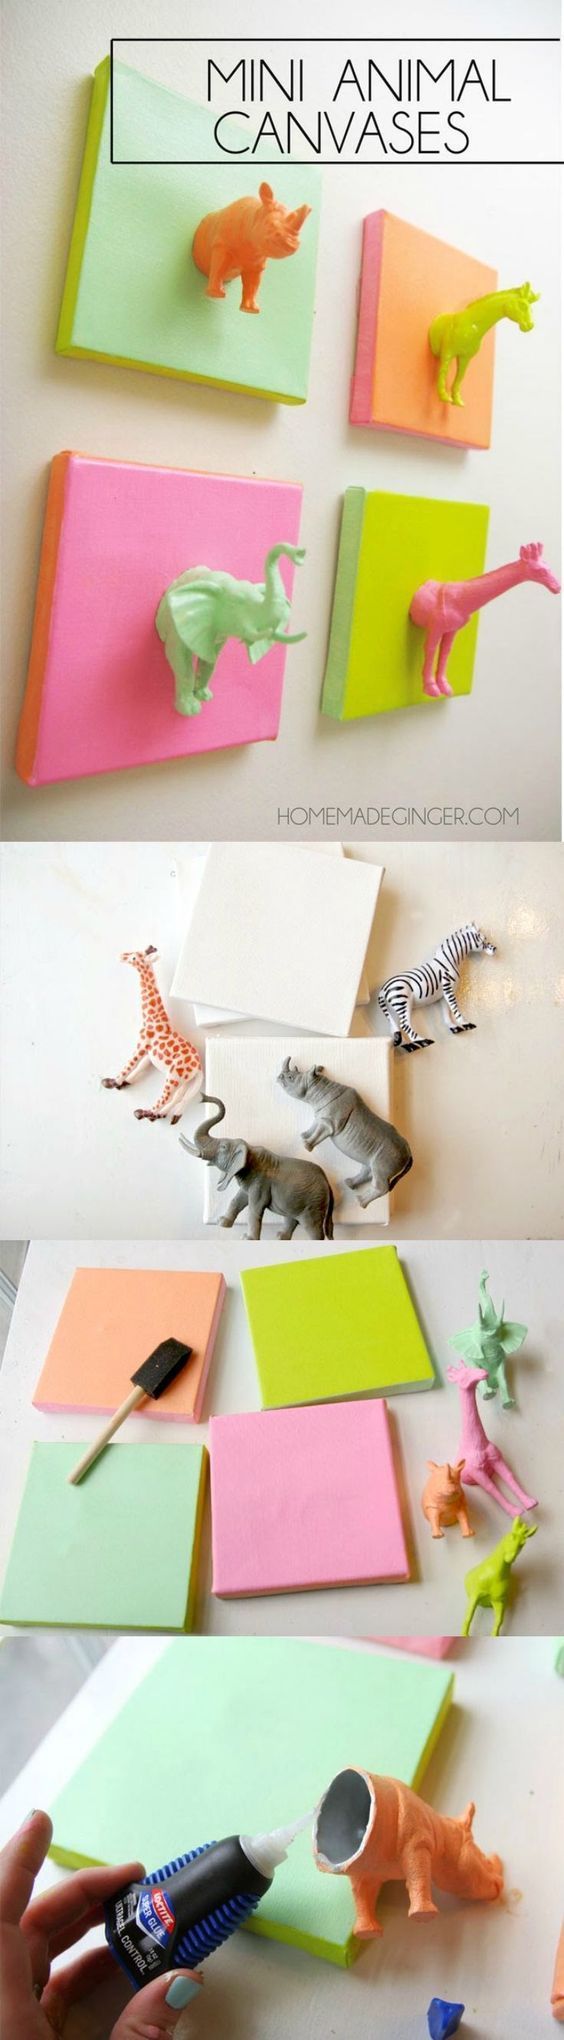 This cute DIY canvas project made with plastic animals is such a fun and easy idea